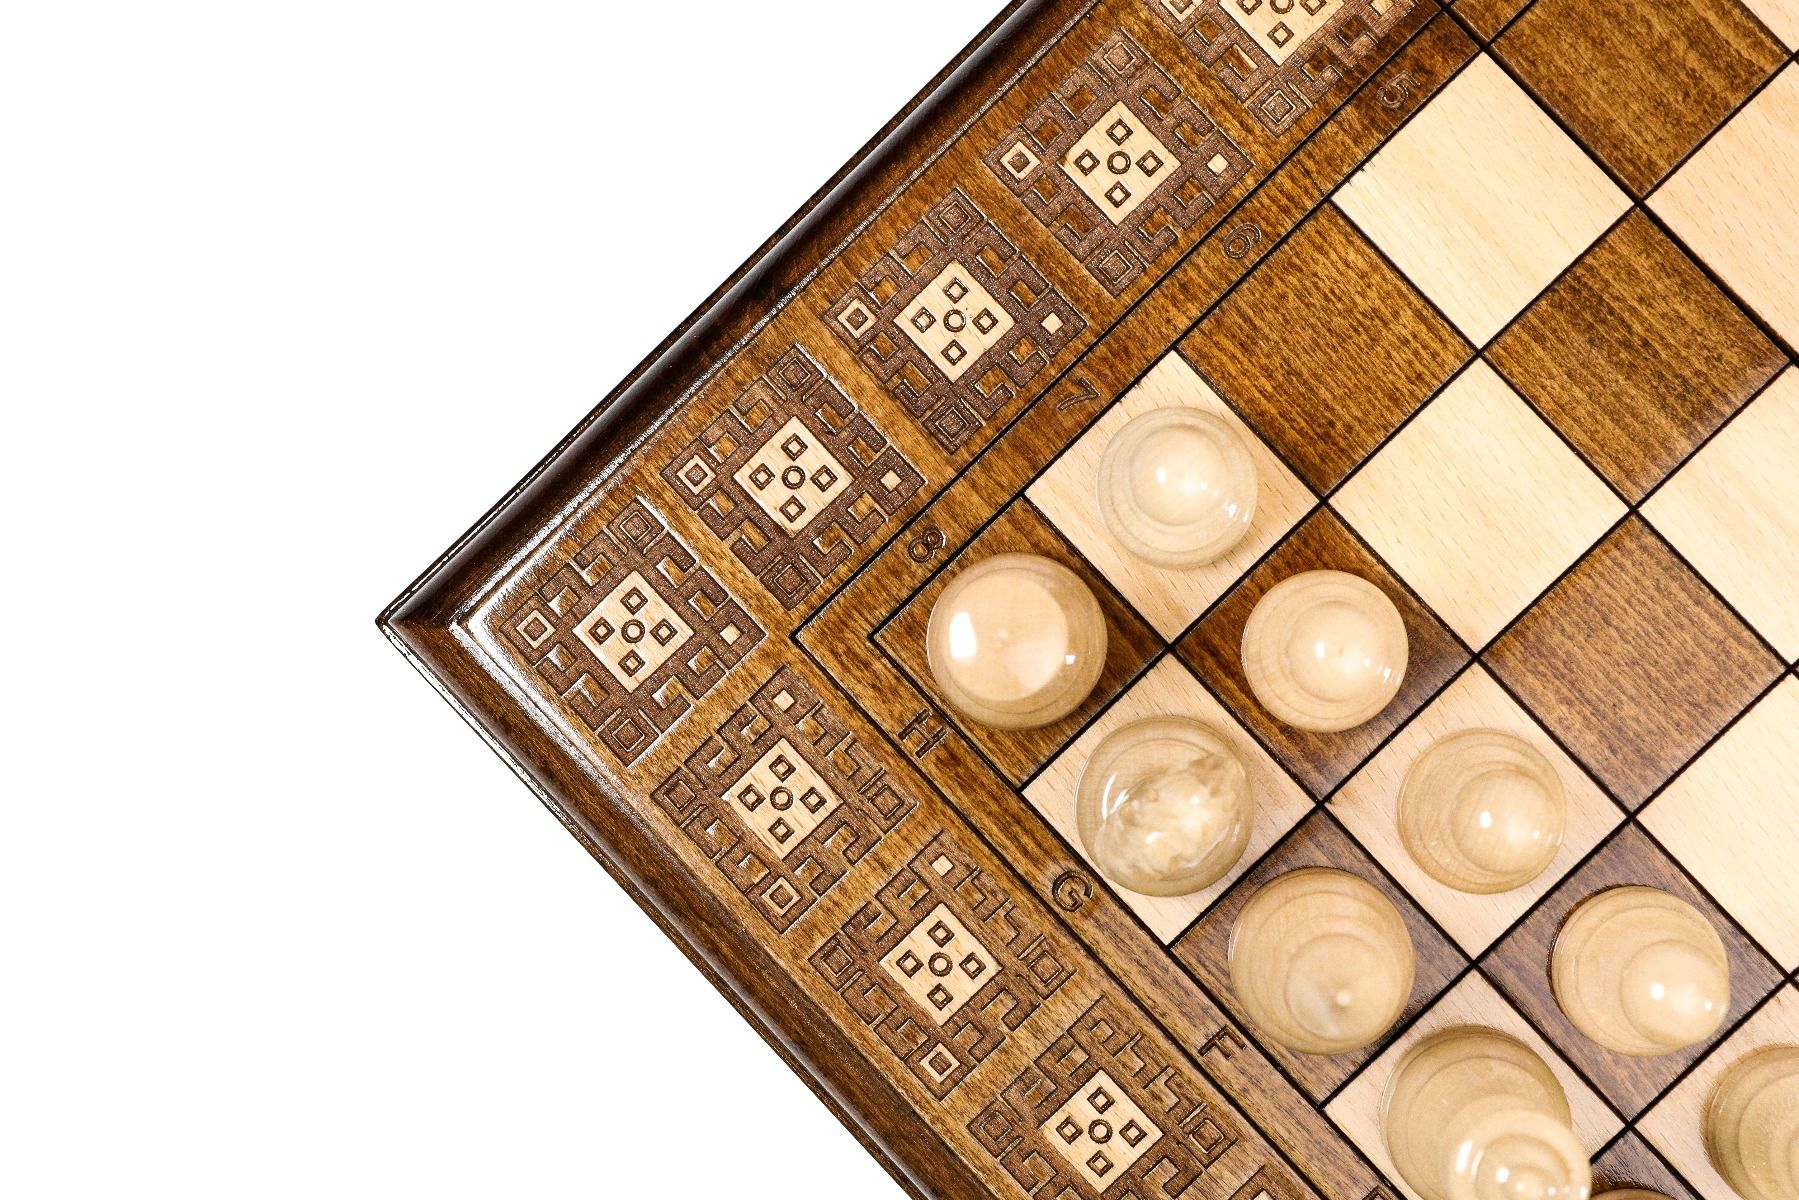 Engage in the art of strategy with a dual-purpose game set, where the craftsmanship of chess meets the beauty of traditional carpet patterns in artisanal elegance.